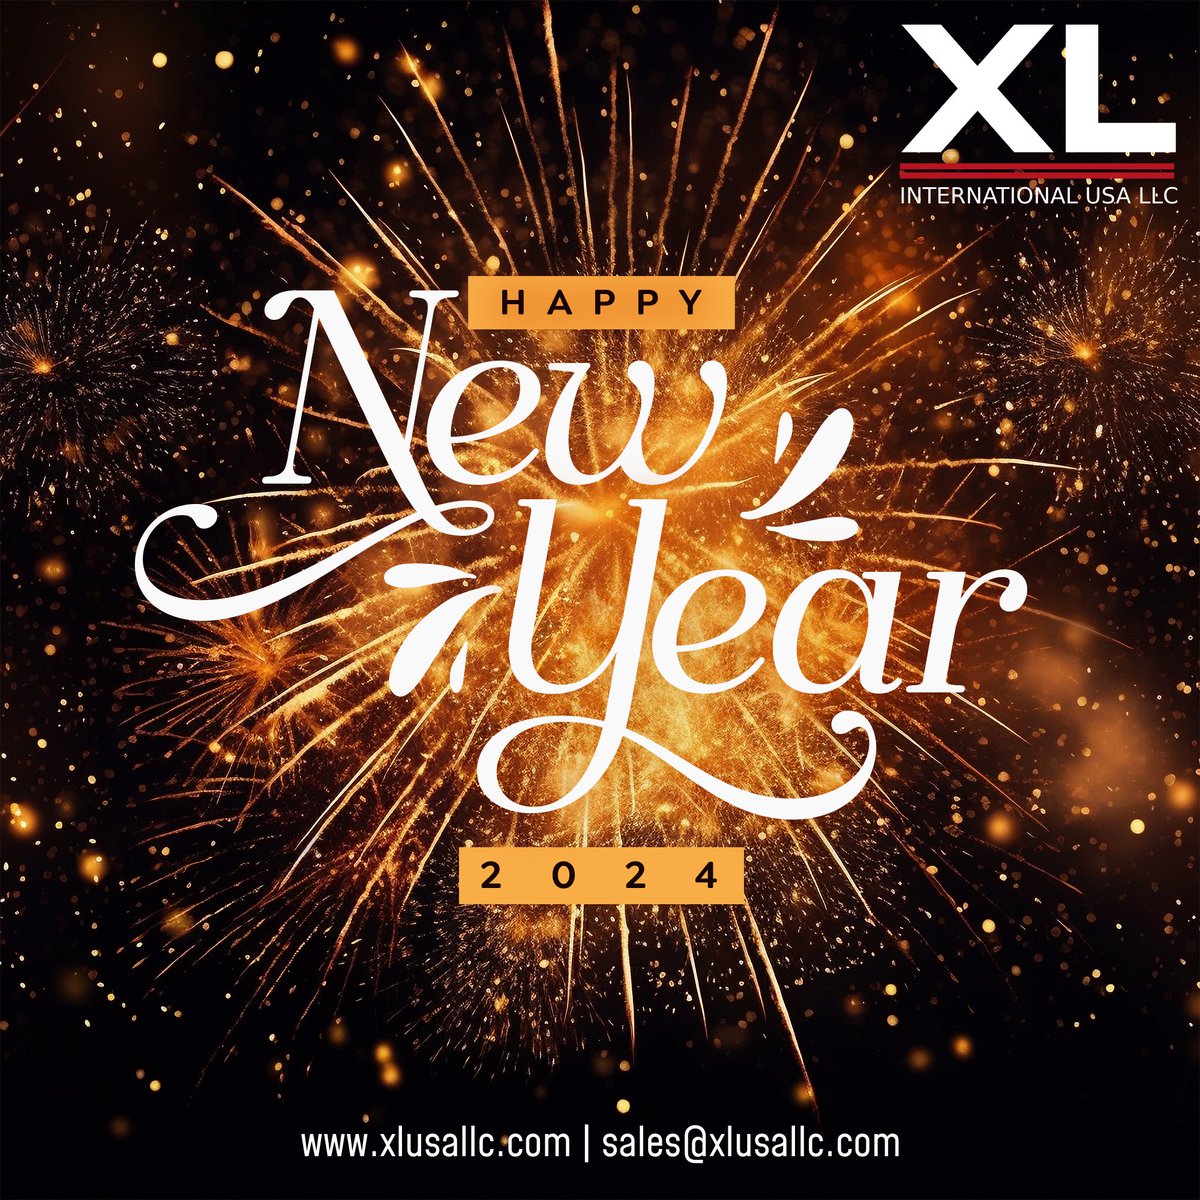 Wishing you and all of your loved ones health and happiness in the new year.

#happynewyear2024
#genuineleather #luxuryleathergoods #ManufacturerPrice #manufacturingexcellence #manufacturingunit